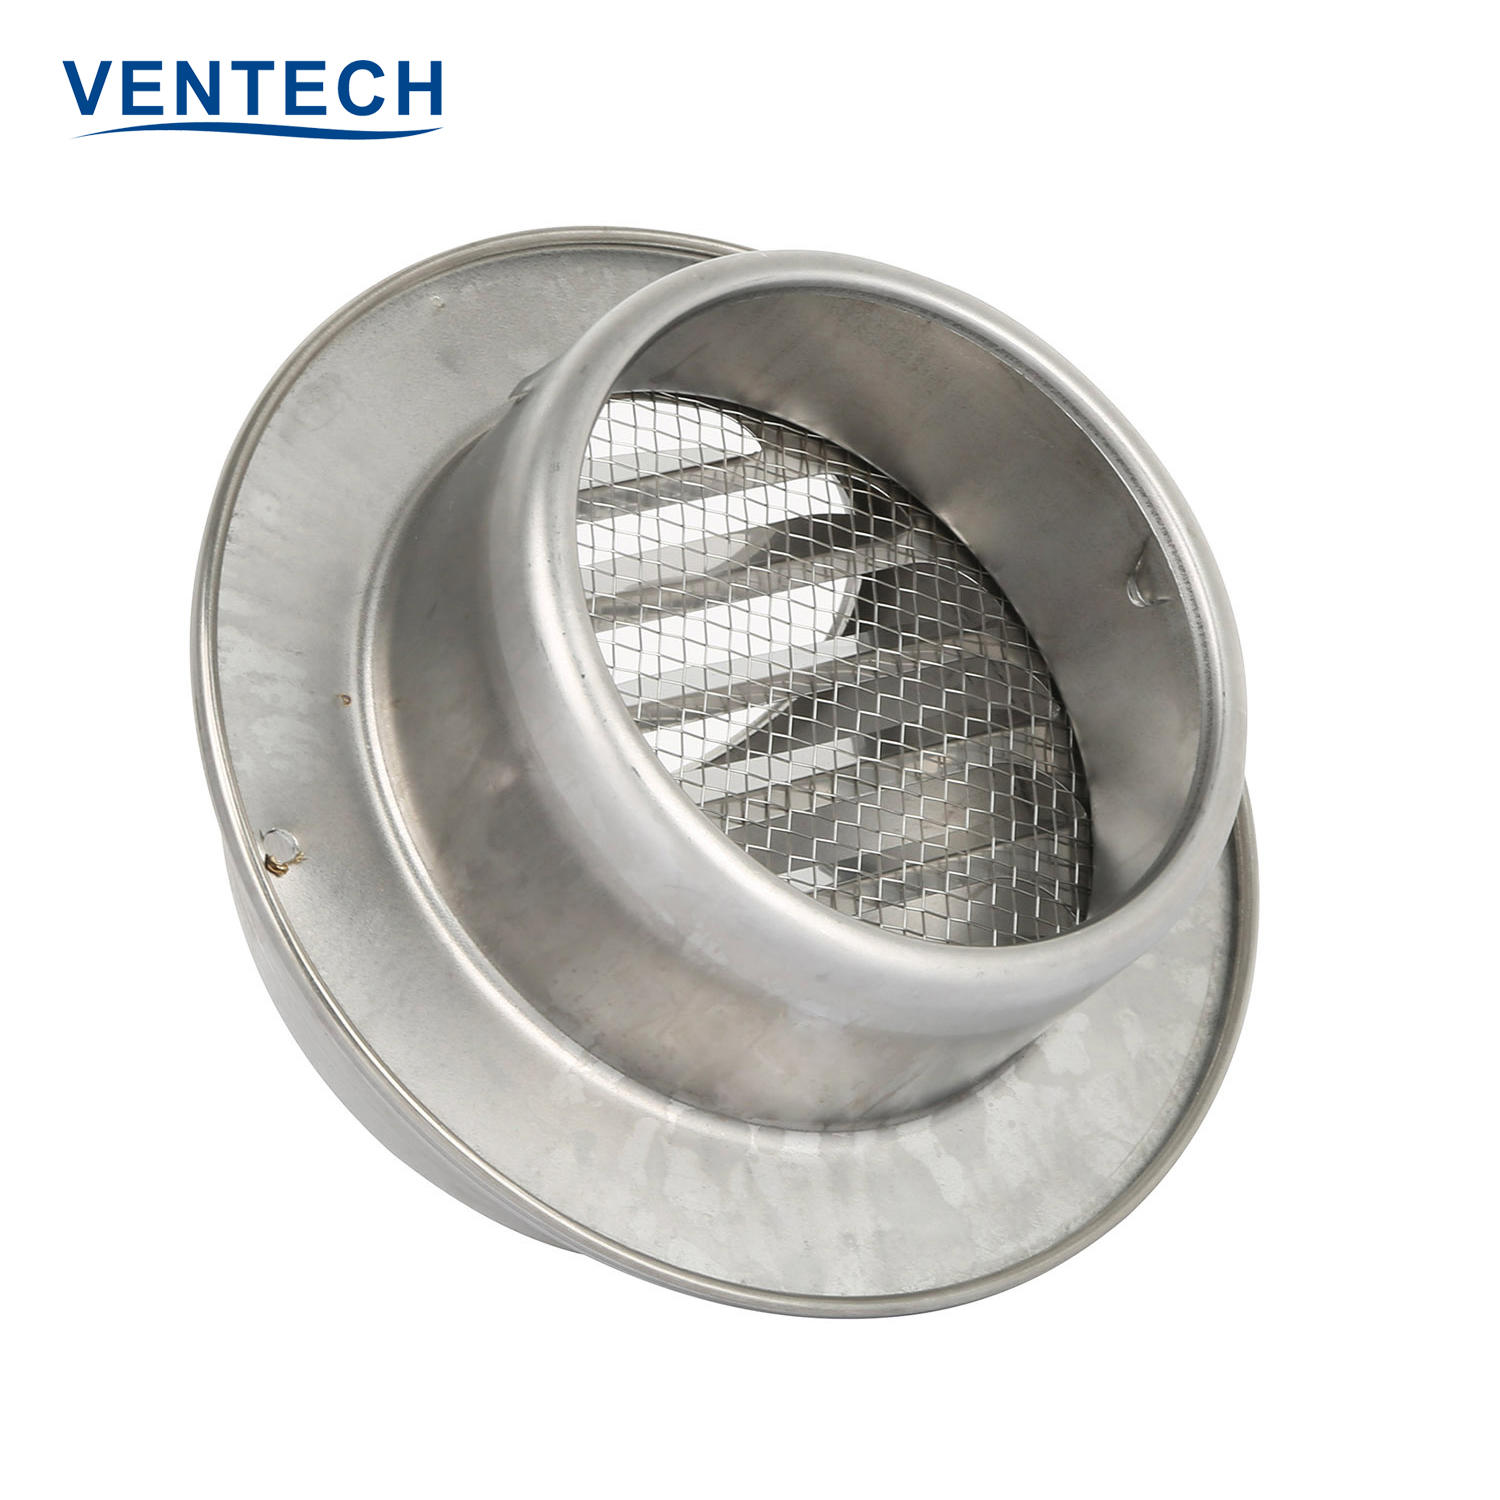 VENTECH Air Vent Cover Stainless Steel Ball Weather Louver For Hvac Ventilation